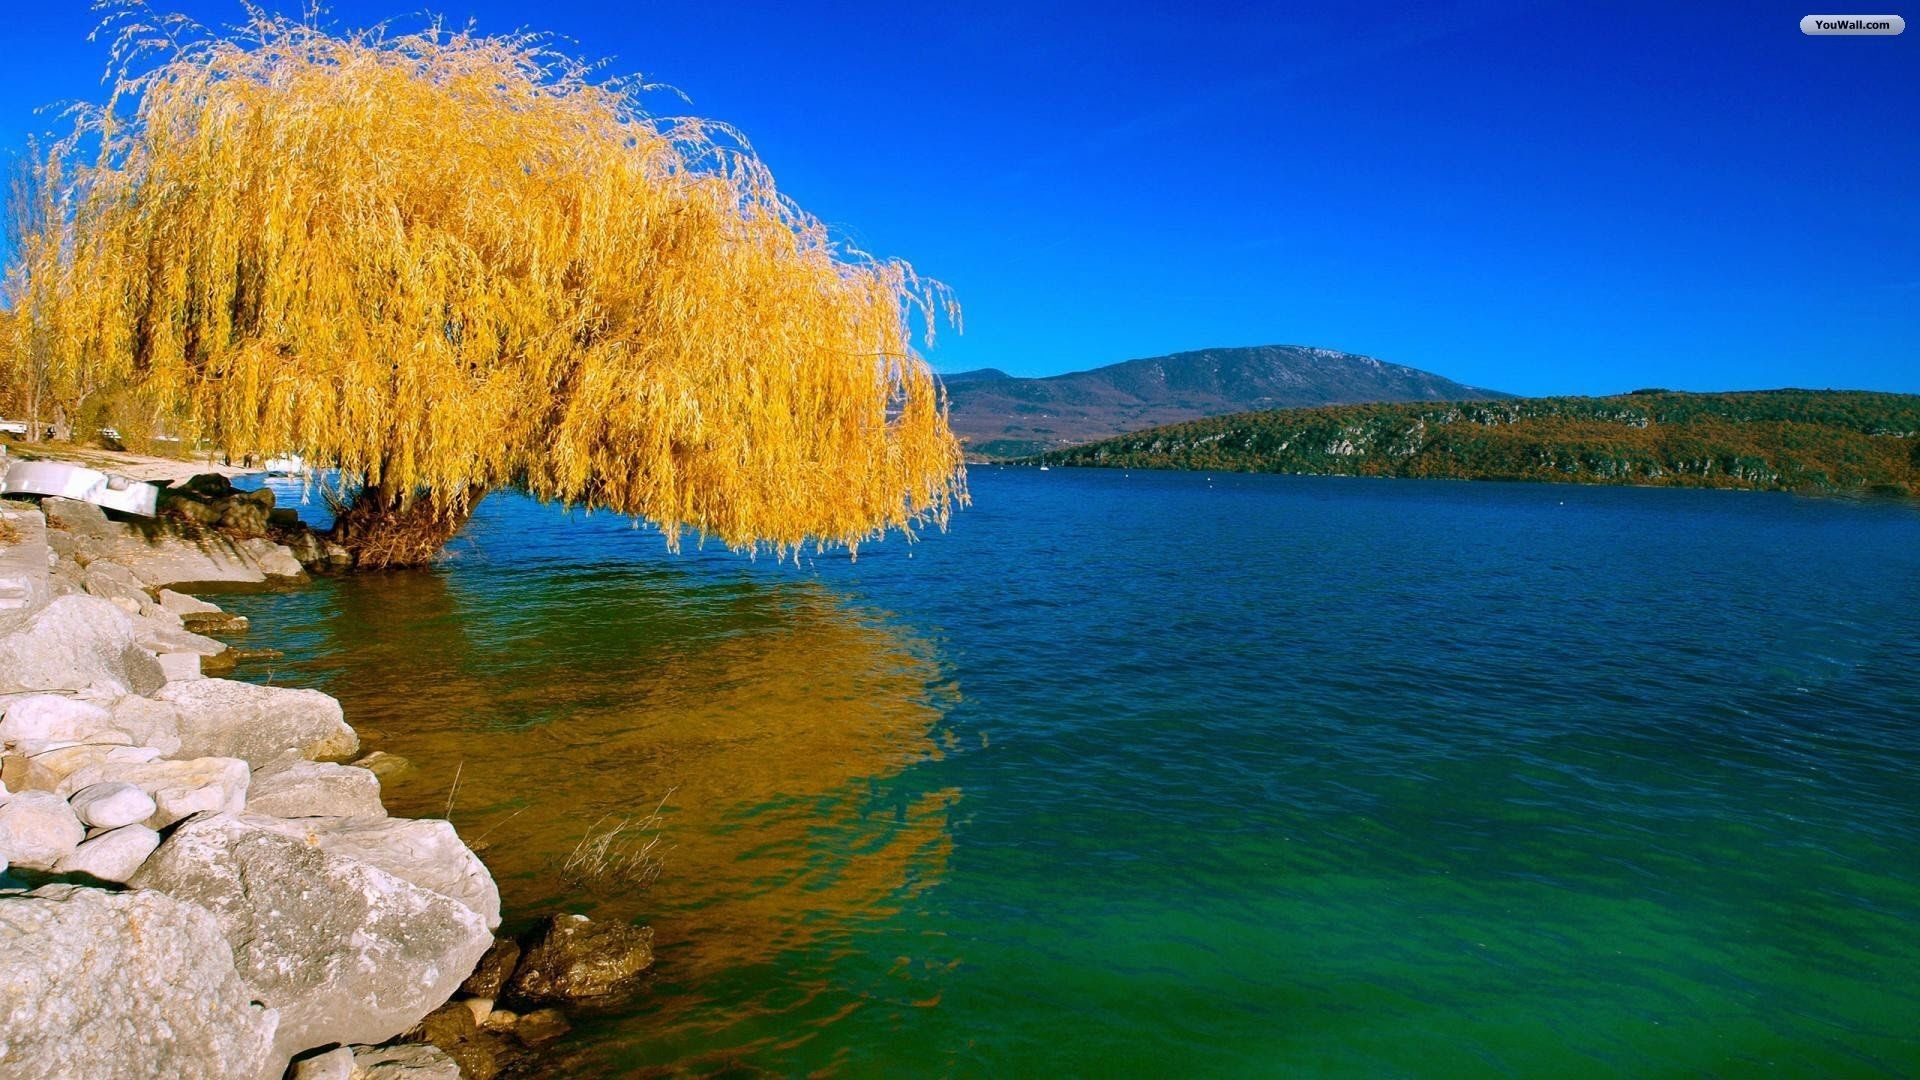 1920x1080 Weeping Willow Wallpapers - Wallpaper Cave Willow Tree, Weeping Willow, Tree  Wallpaper, Scenery